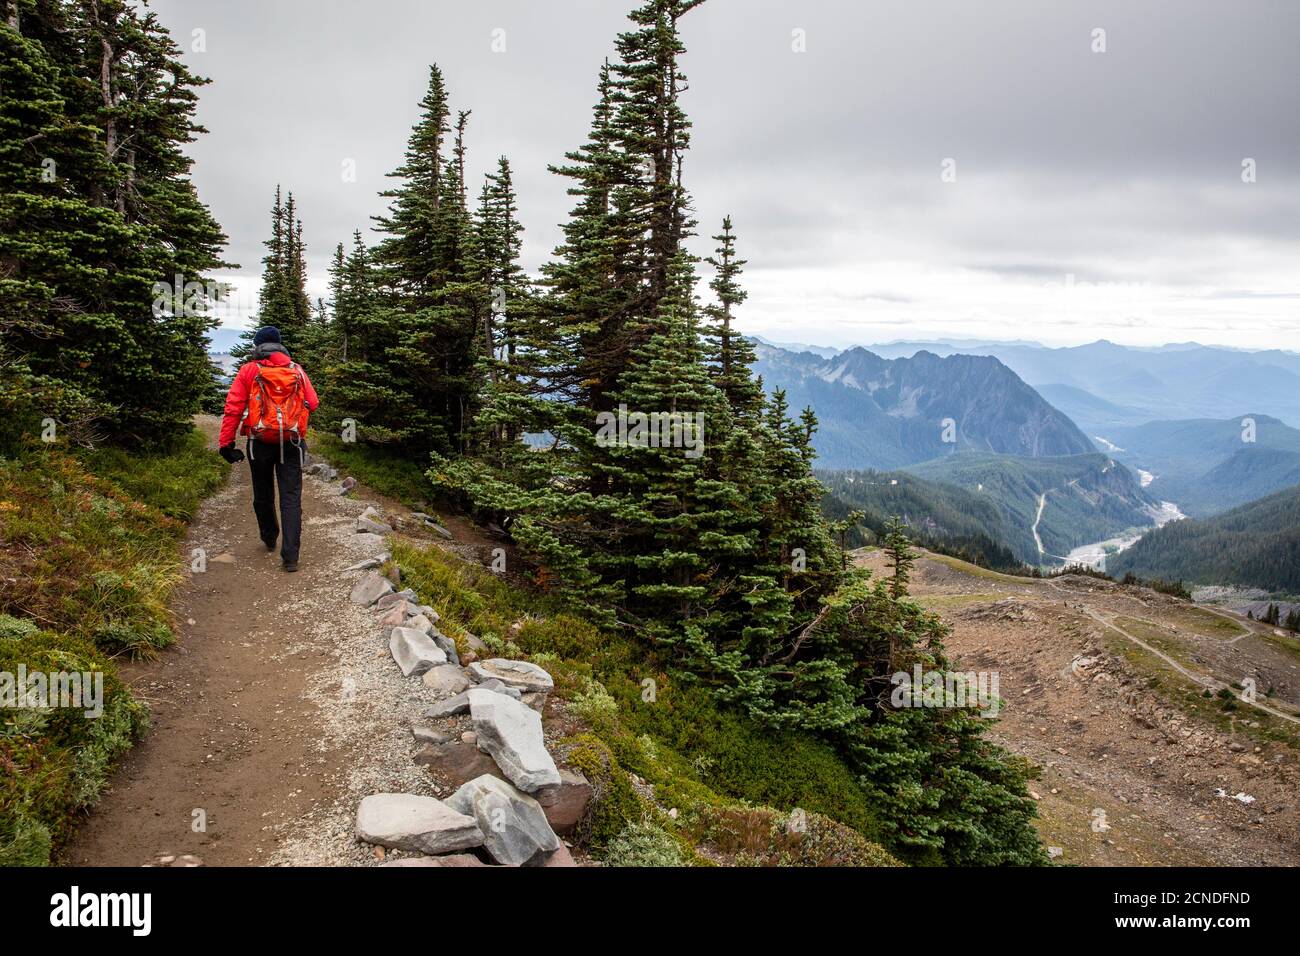 Views from the Skyline Trail of Mount Rainier National Park, Washington State, United States of America Stock Photo